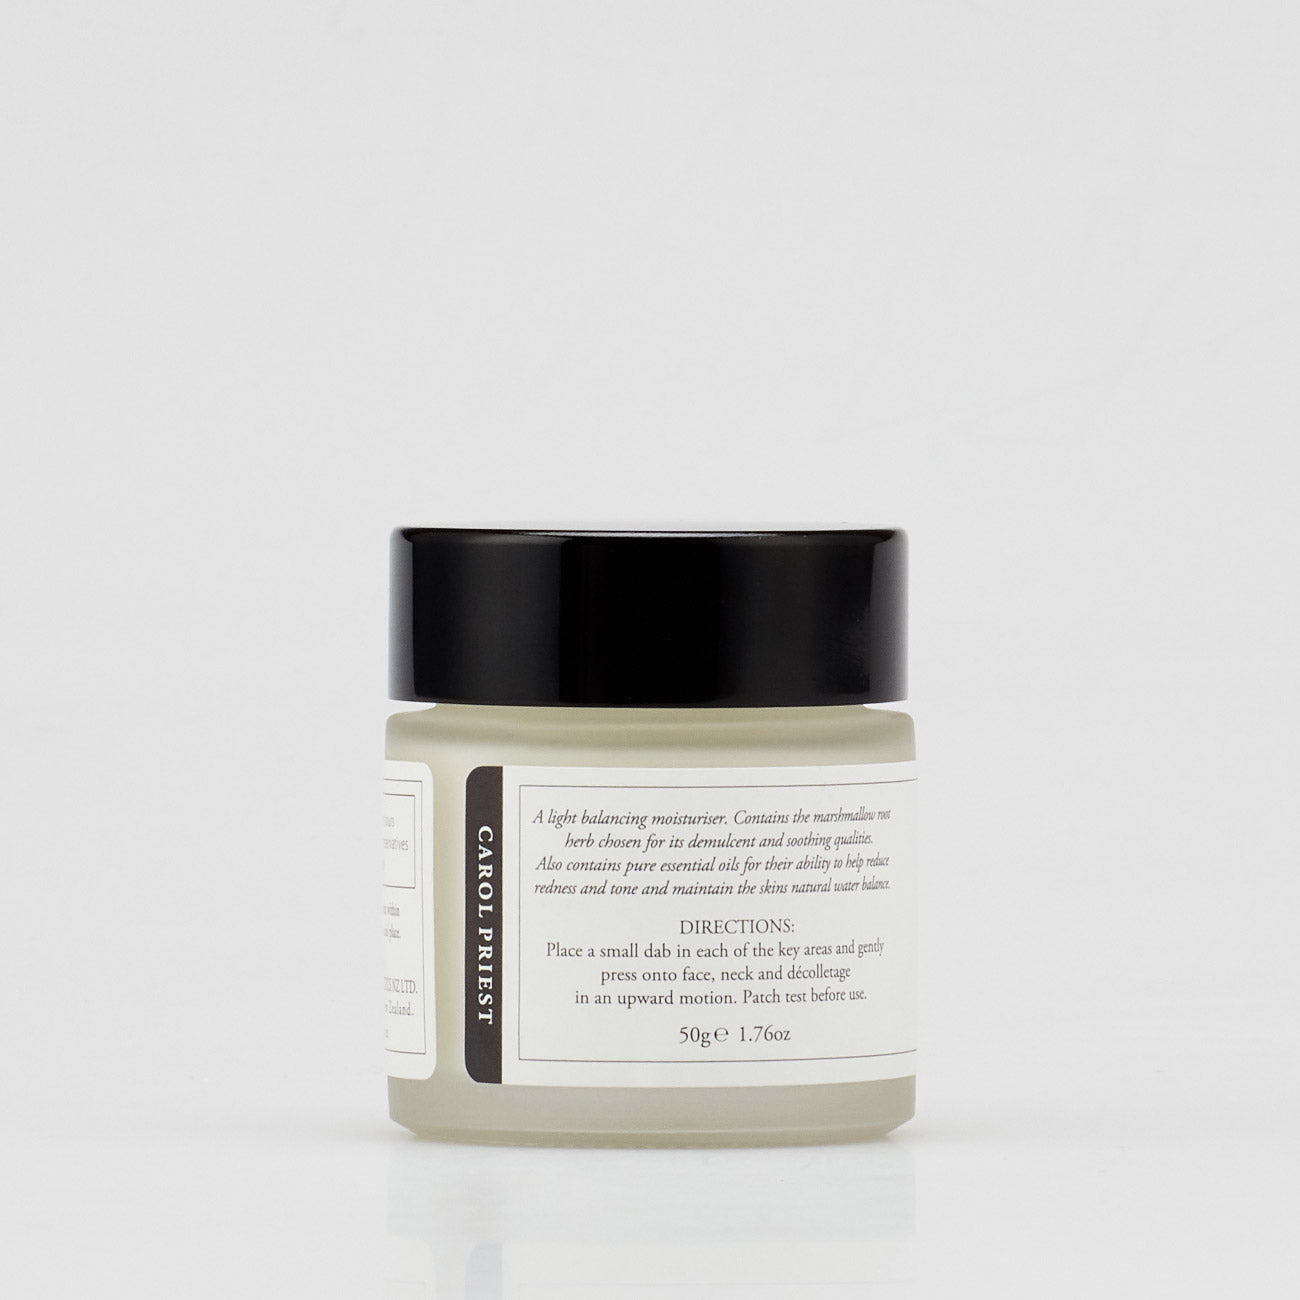 photo showcasing the back of Marshmallow Root Day Moisture Cream by Carol Priest, a natural, organic cosmetic